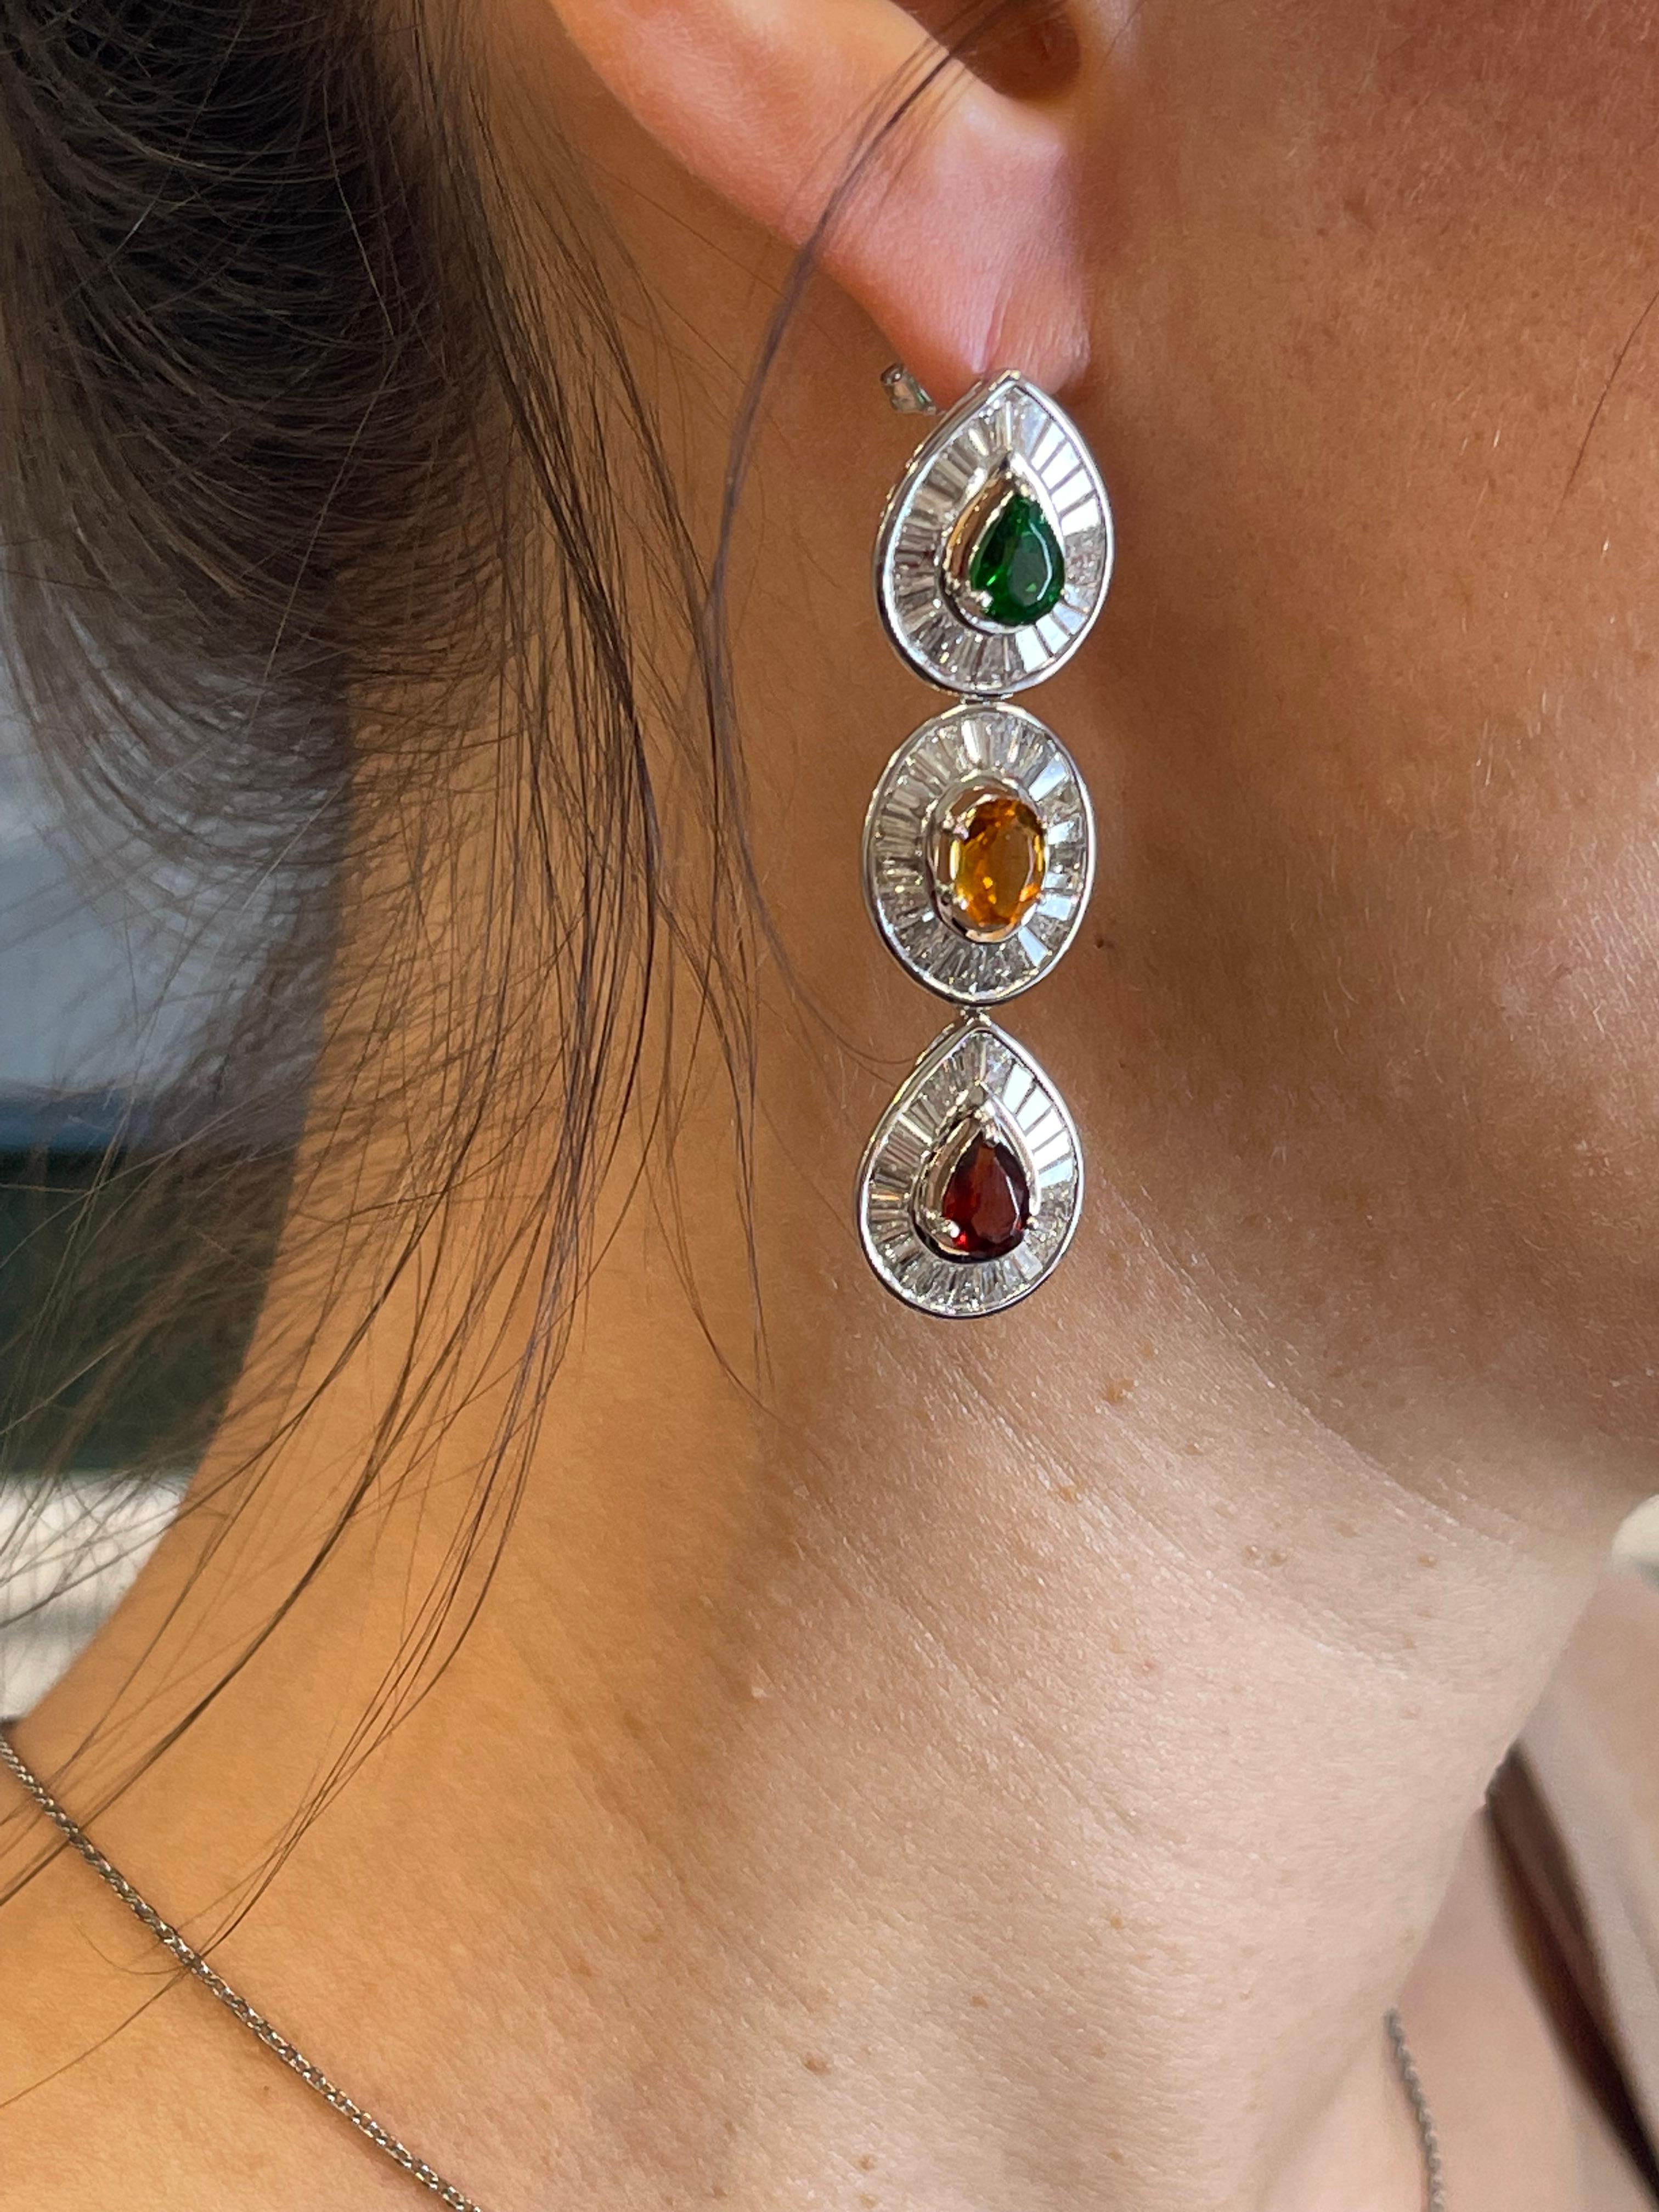 The 14k white gold setting provides a beautiful and durable base for the earrings, complementing the brilliance of the diamonds. The main diamonds, weighing 5 carats, would be quite sizable and eye-catching, adding a touch of luxury to any outfit.